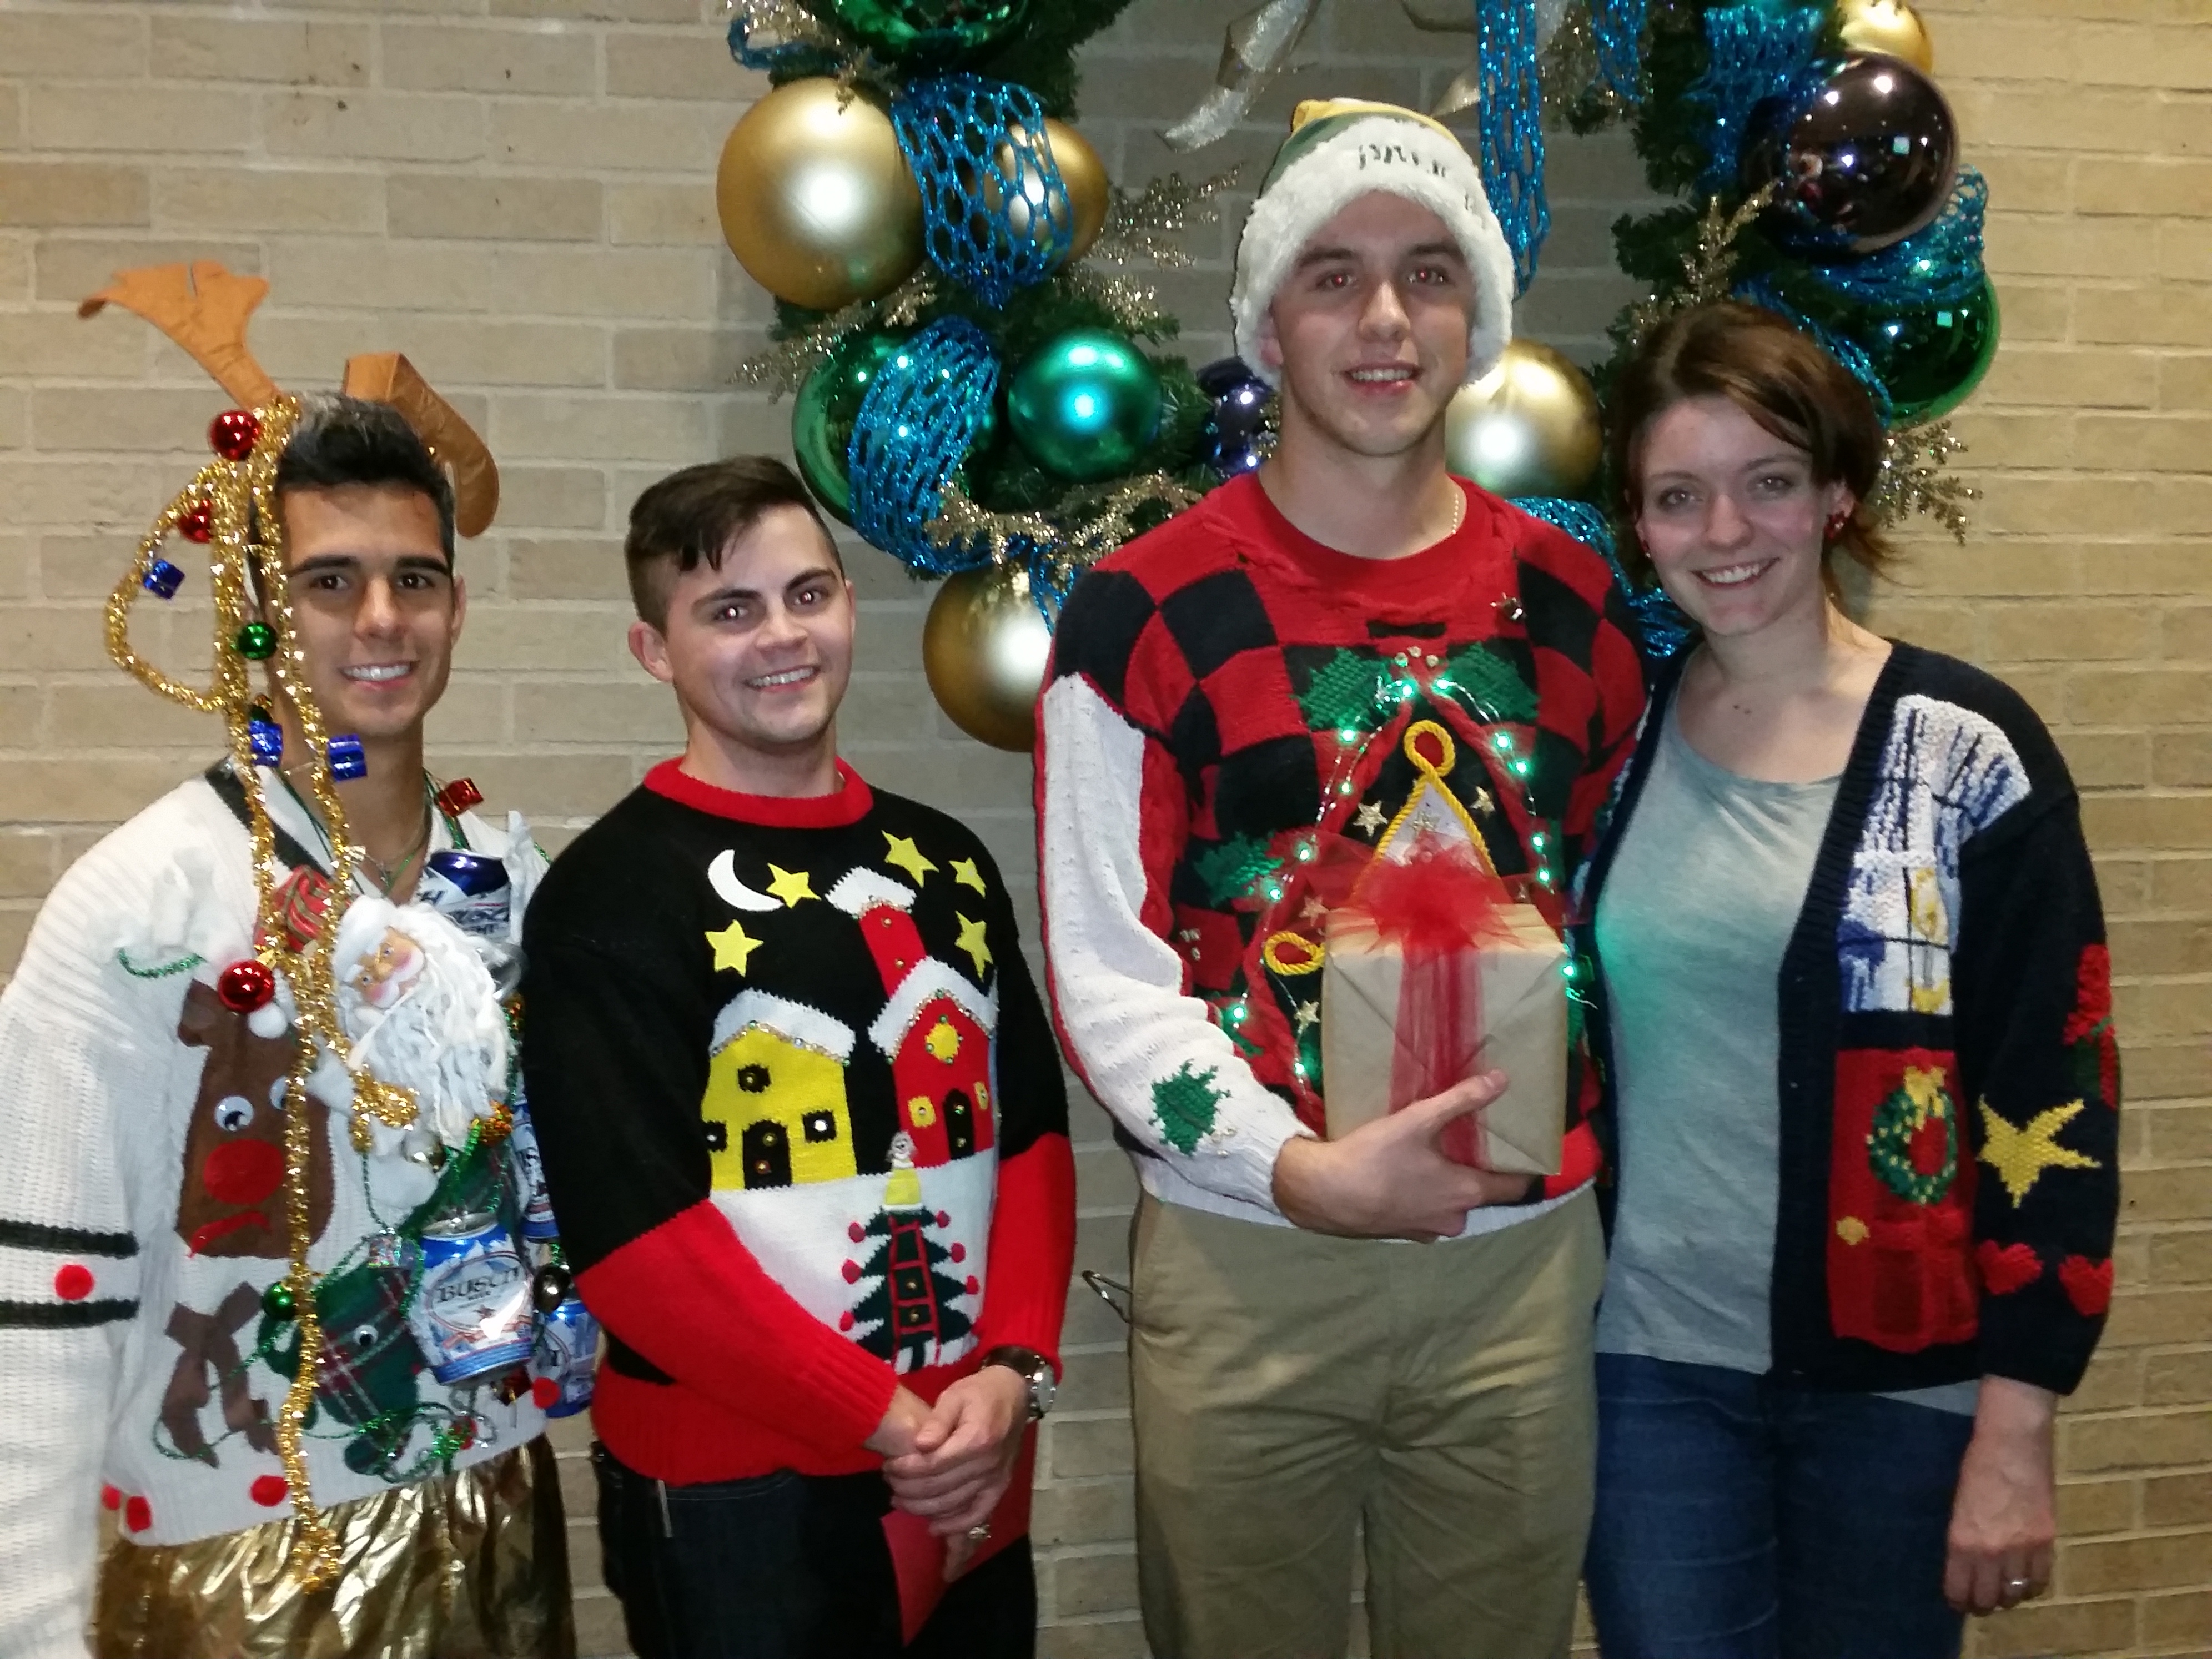 From left to right: James Gwosdz (2nd place), Andrew DeCrescenzo (3rd place), and 1st Place Winner Ryan Gates and guest.